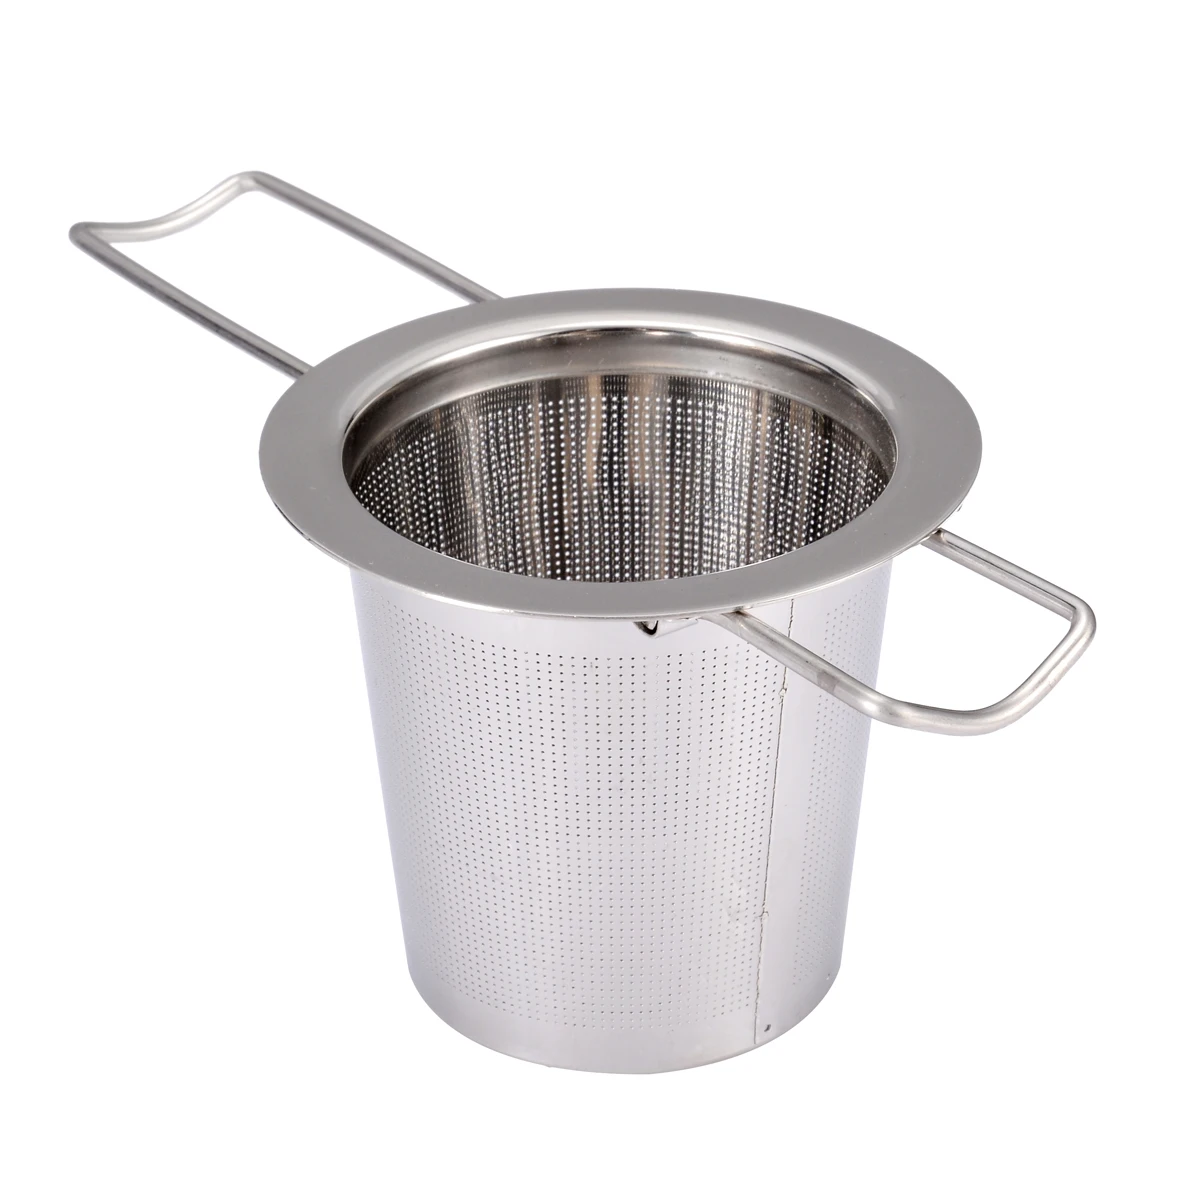 1pcs Stainless Steel Mesh Tea Infuser Tea Cup Strainer Metal Loose Leaf Filter with Lid for Home Restaurant Drinking Supplies